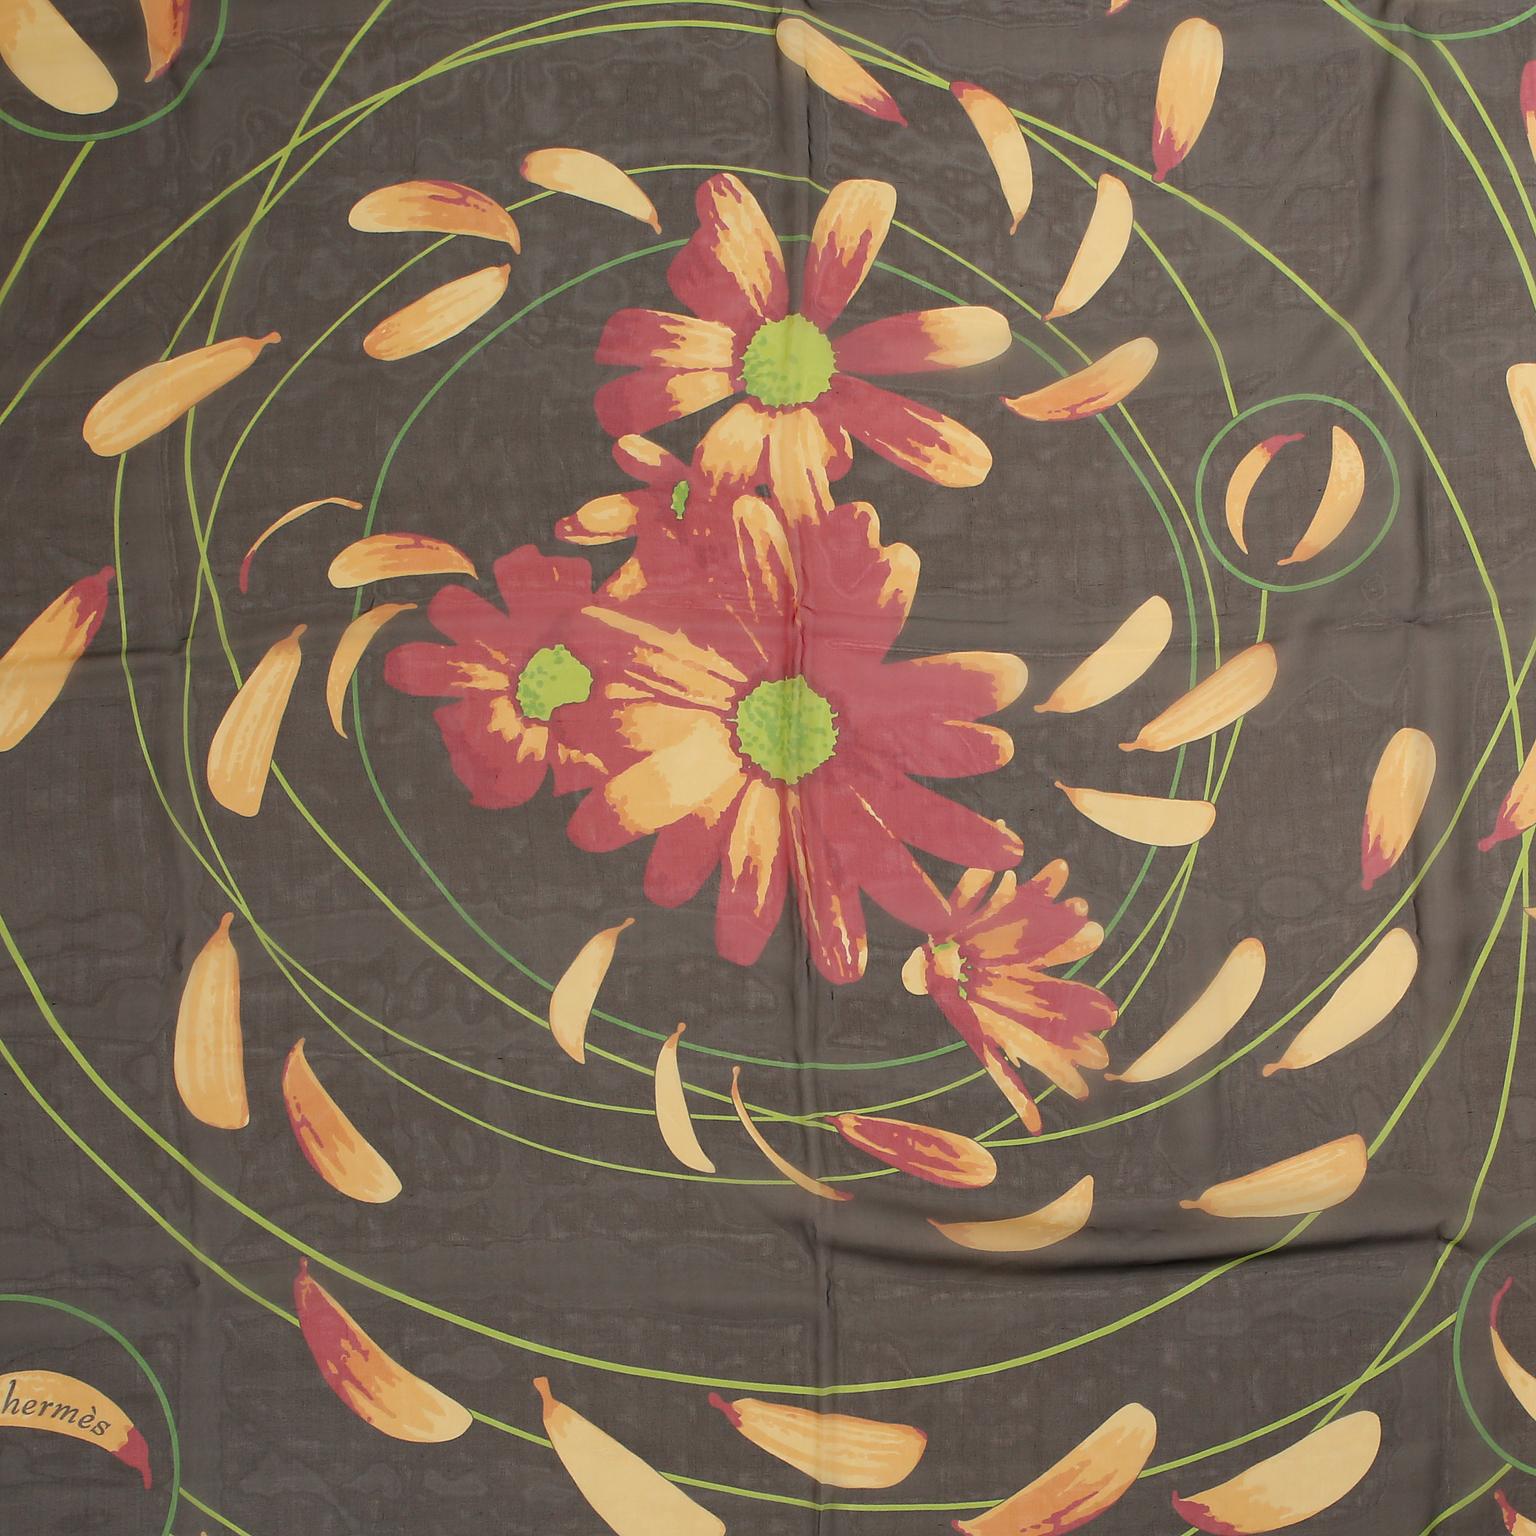 Hermès Au Gre du Vent 90 cm Silk Scarf- Pristine
 Issued in 2002 and designed by Dimitri Rybaltchenko.  Brown background with flower petals swirling “by the wind.”  100% silk.  Made in France.  35”.
A363